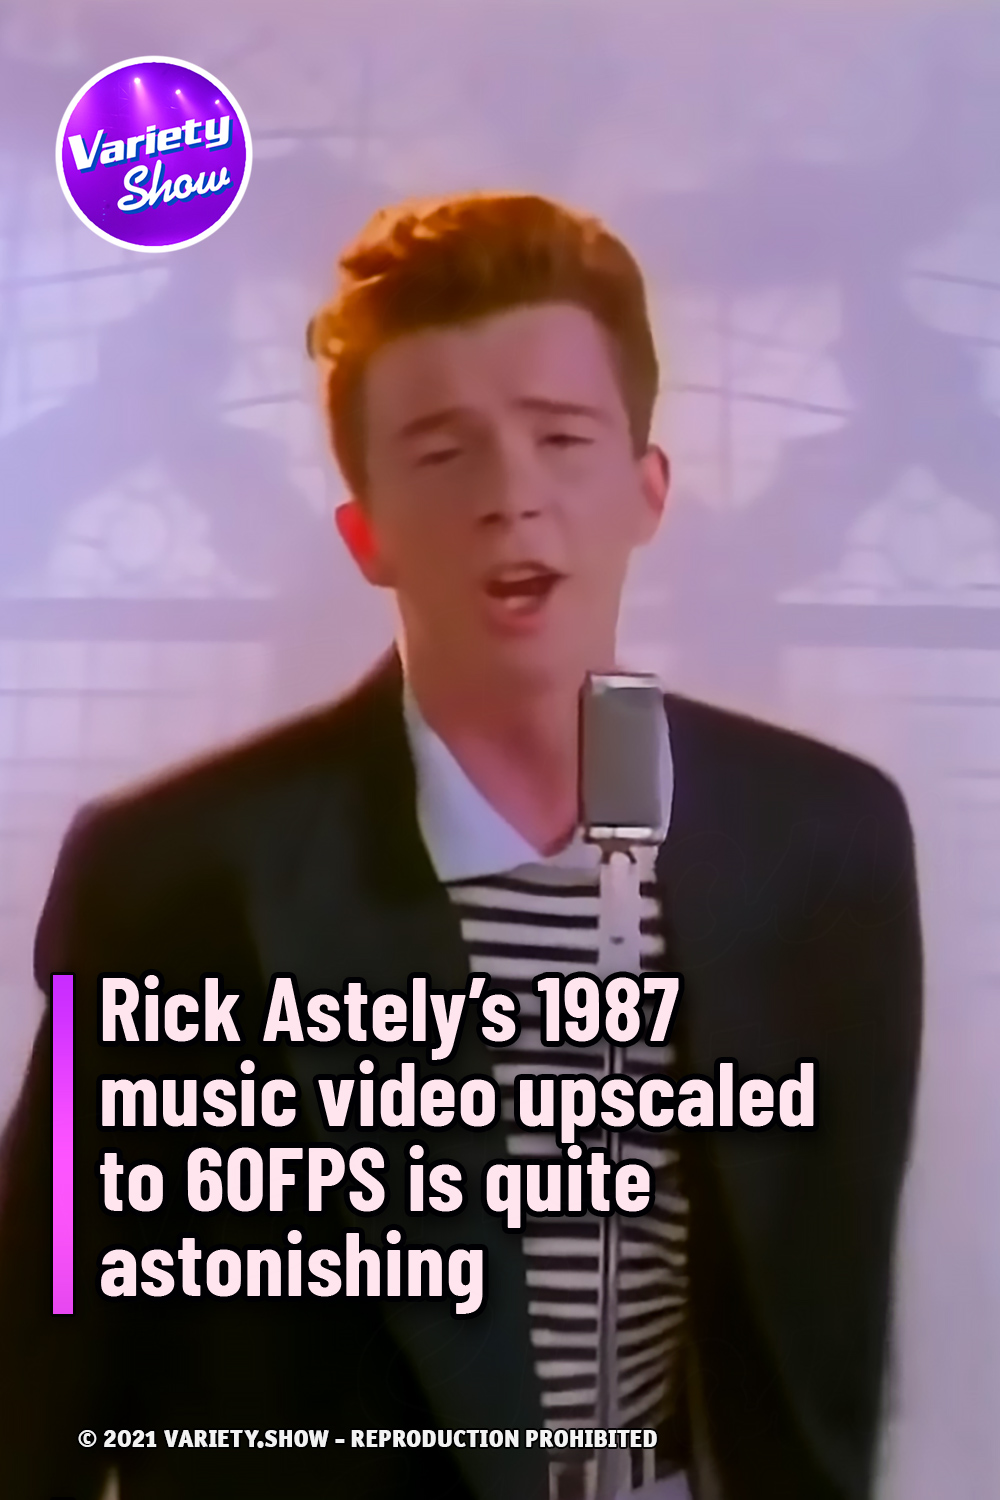 Rick Astely’s 1987 music video upscaled to 60FPS is quite astonishing